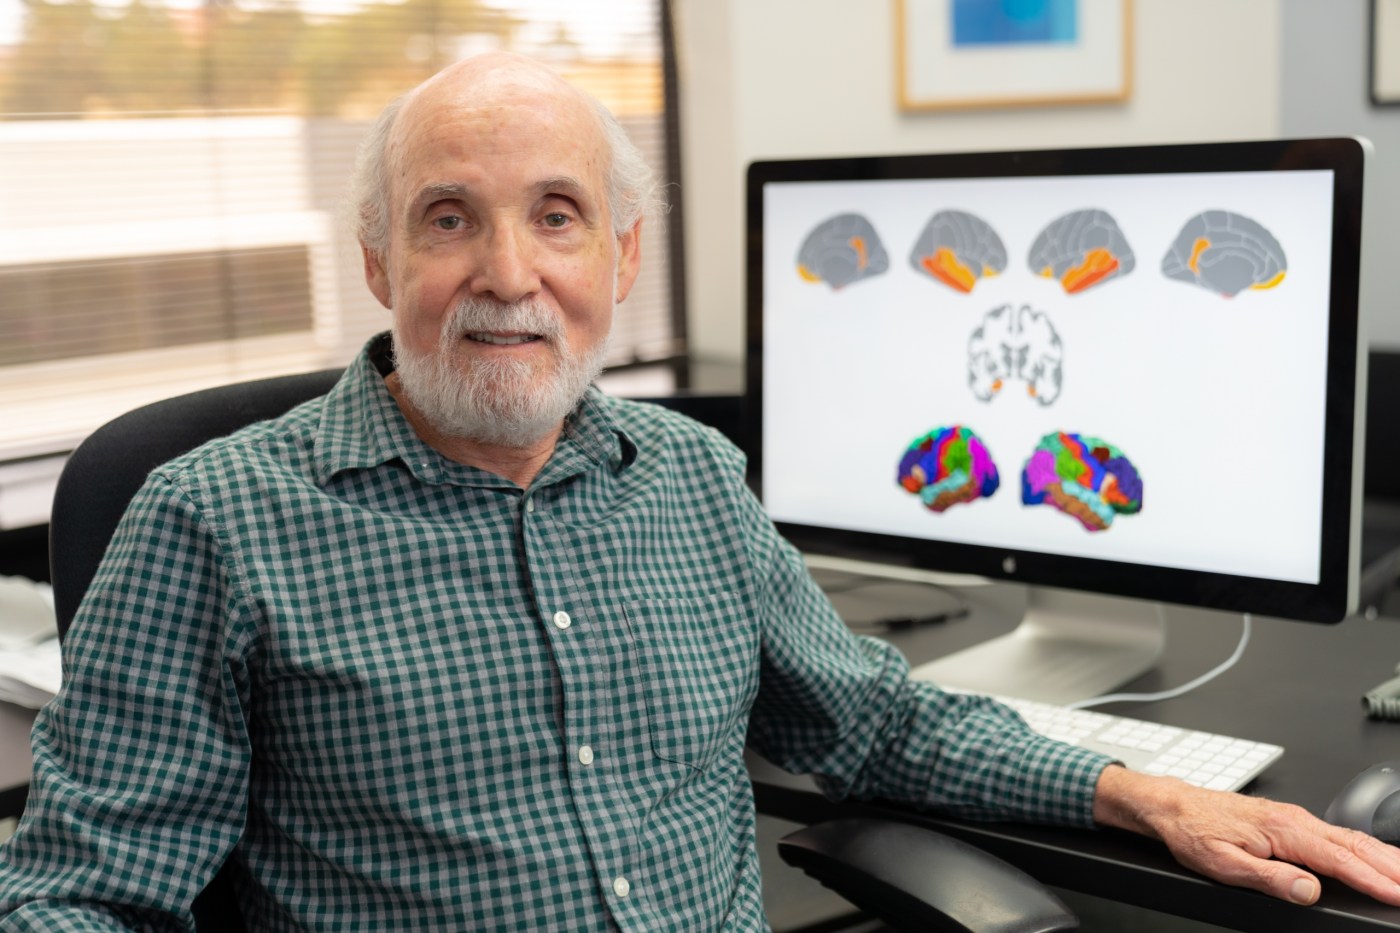 Dr. William Kremen, a neuropsychologist, embarked on the study because little is known about the ability of brain images of cognitively normal adults to predict progression to mild cognitive impairment.